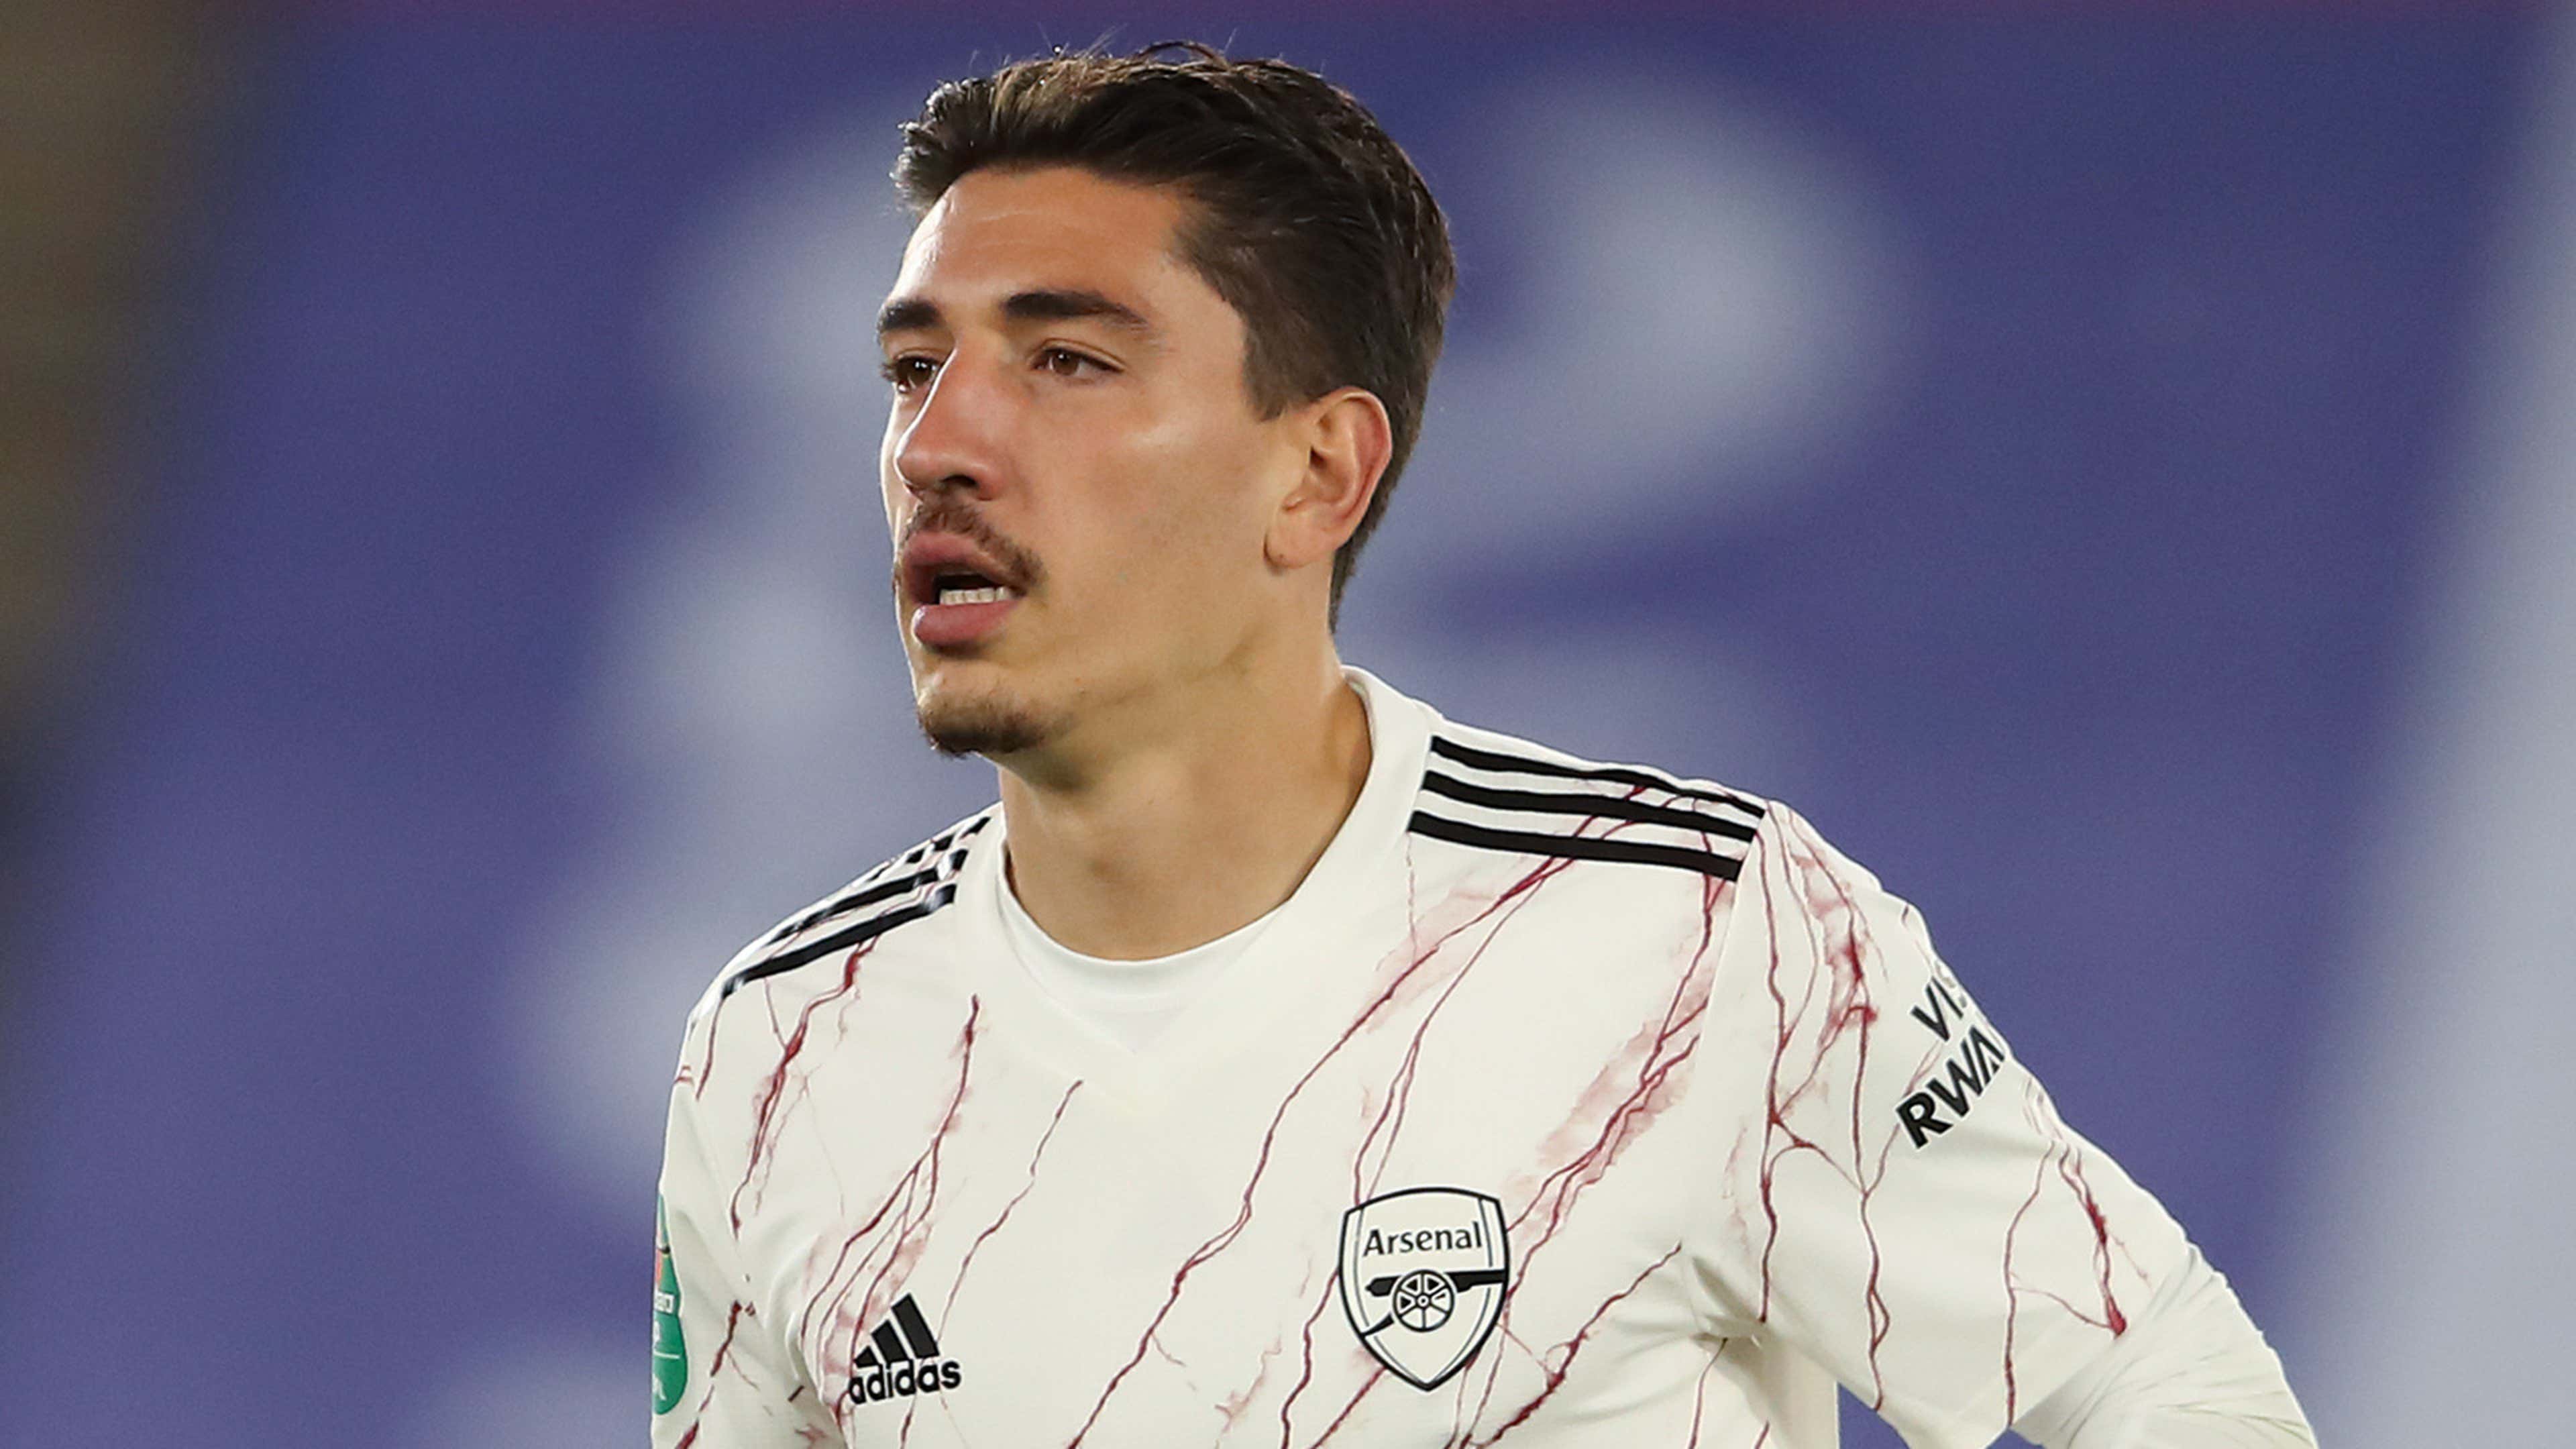 Hector Bellerin has been called up to the Spanish national team